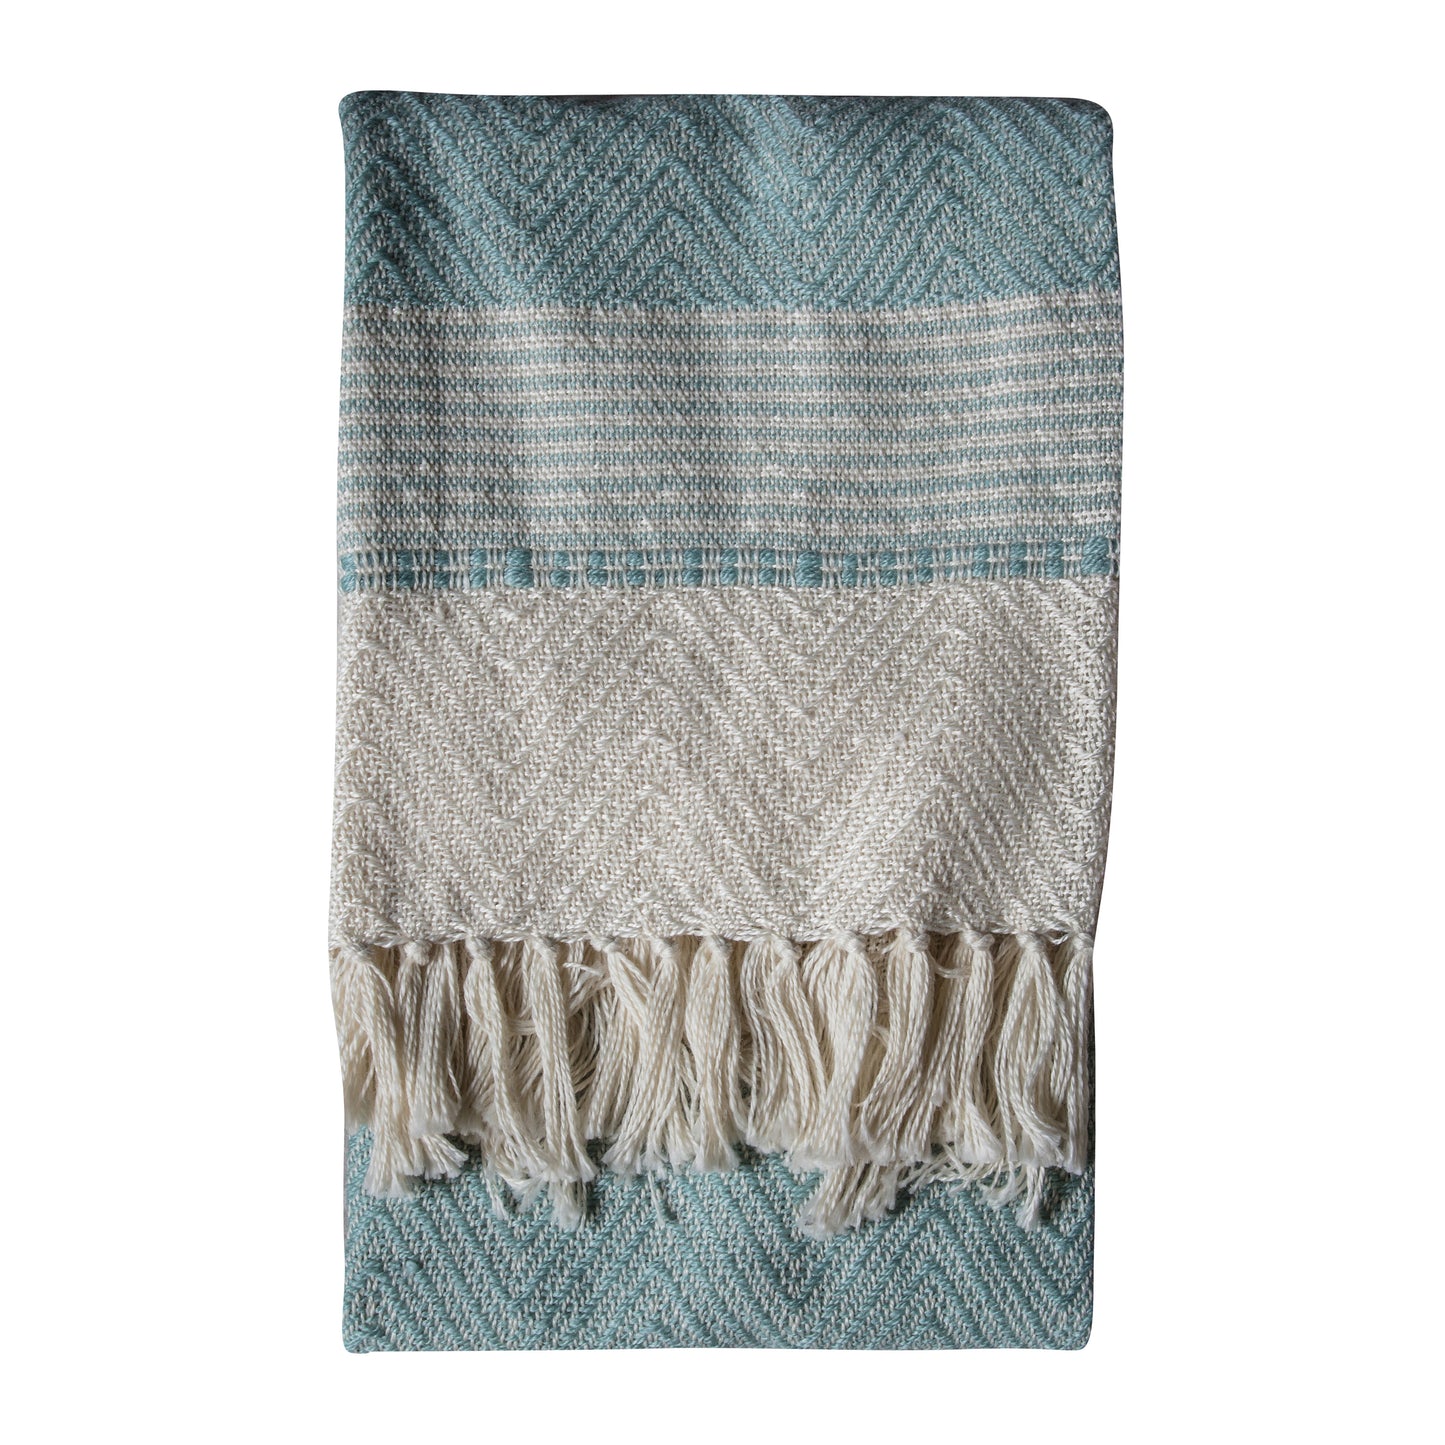 A PET Chevron Throw Duck Egg 1300x1700mm with fringes available at Kikiathome.co.uk, perfect for interior decor and home furniture.